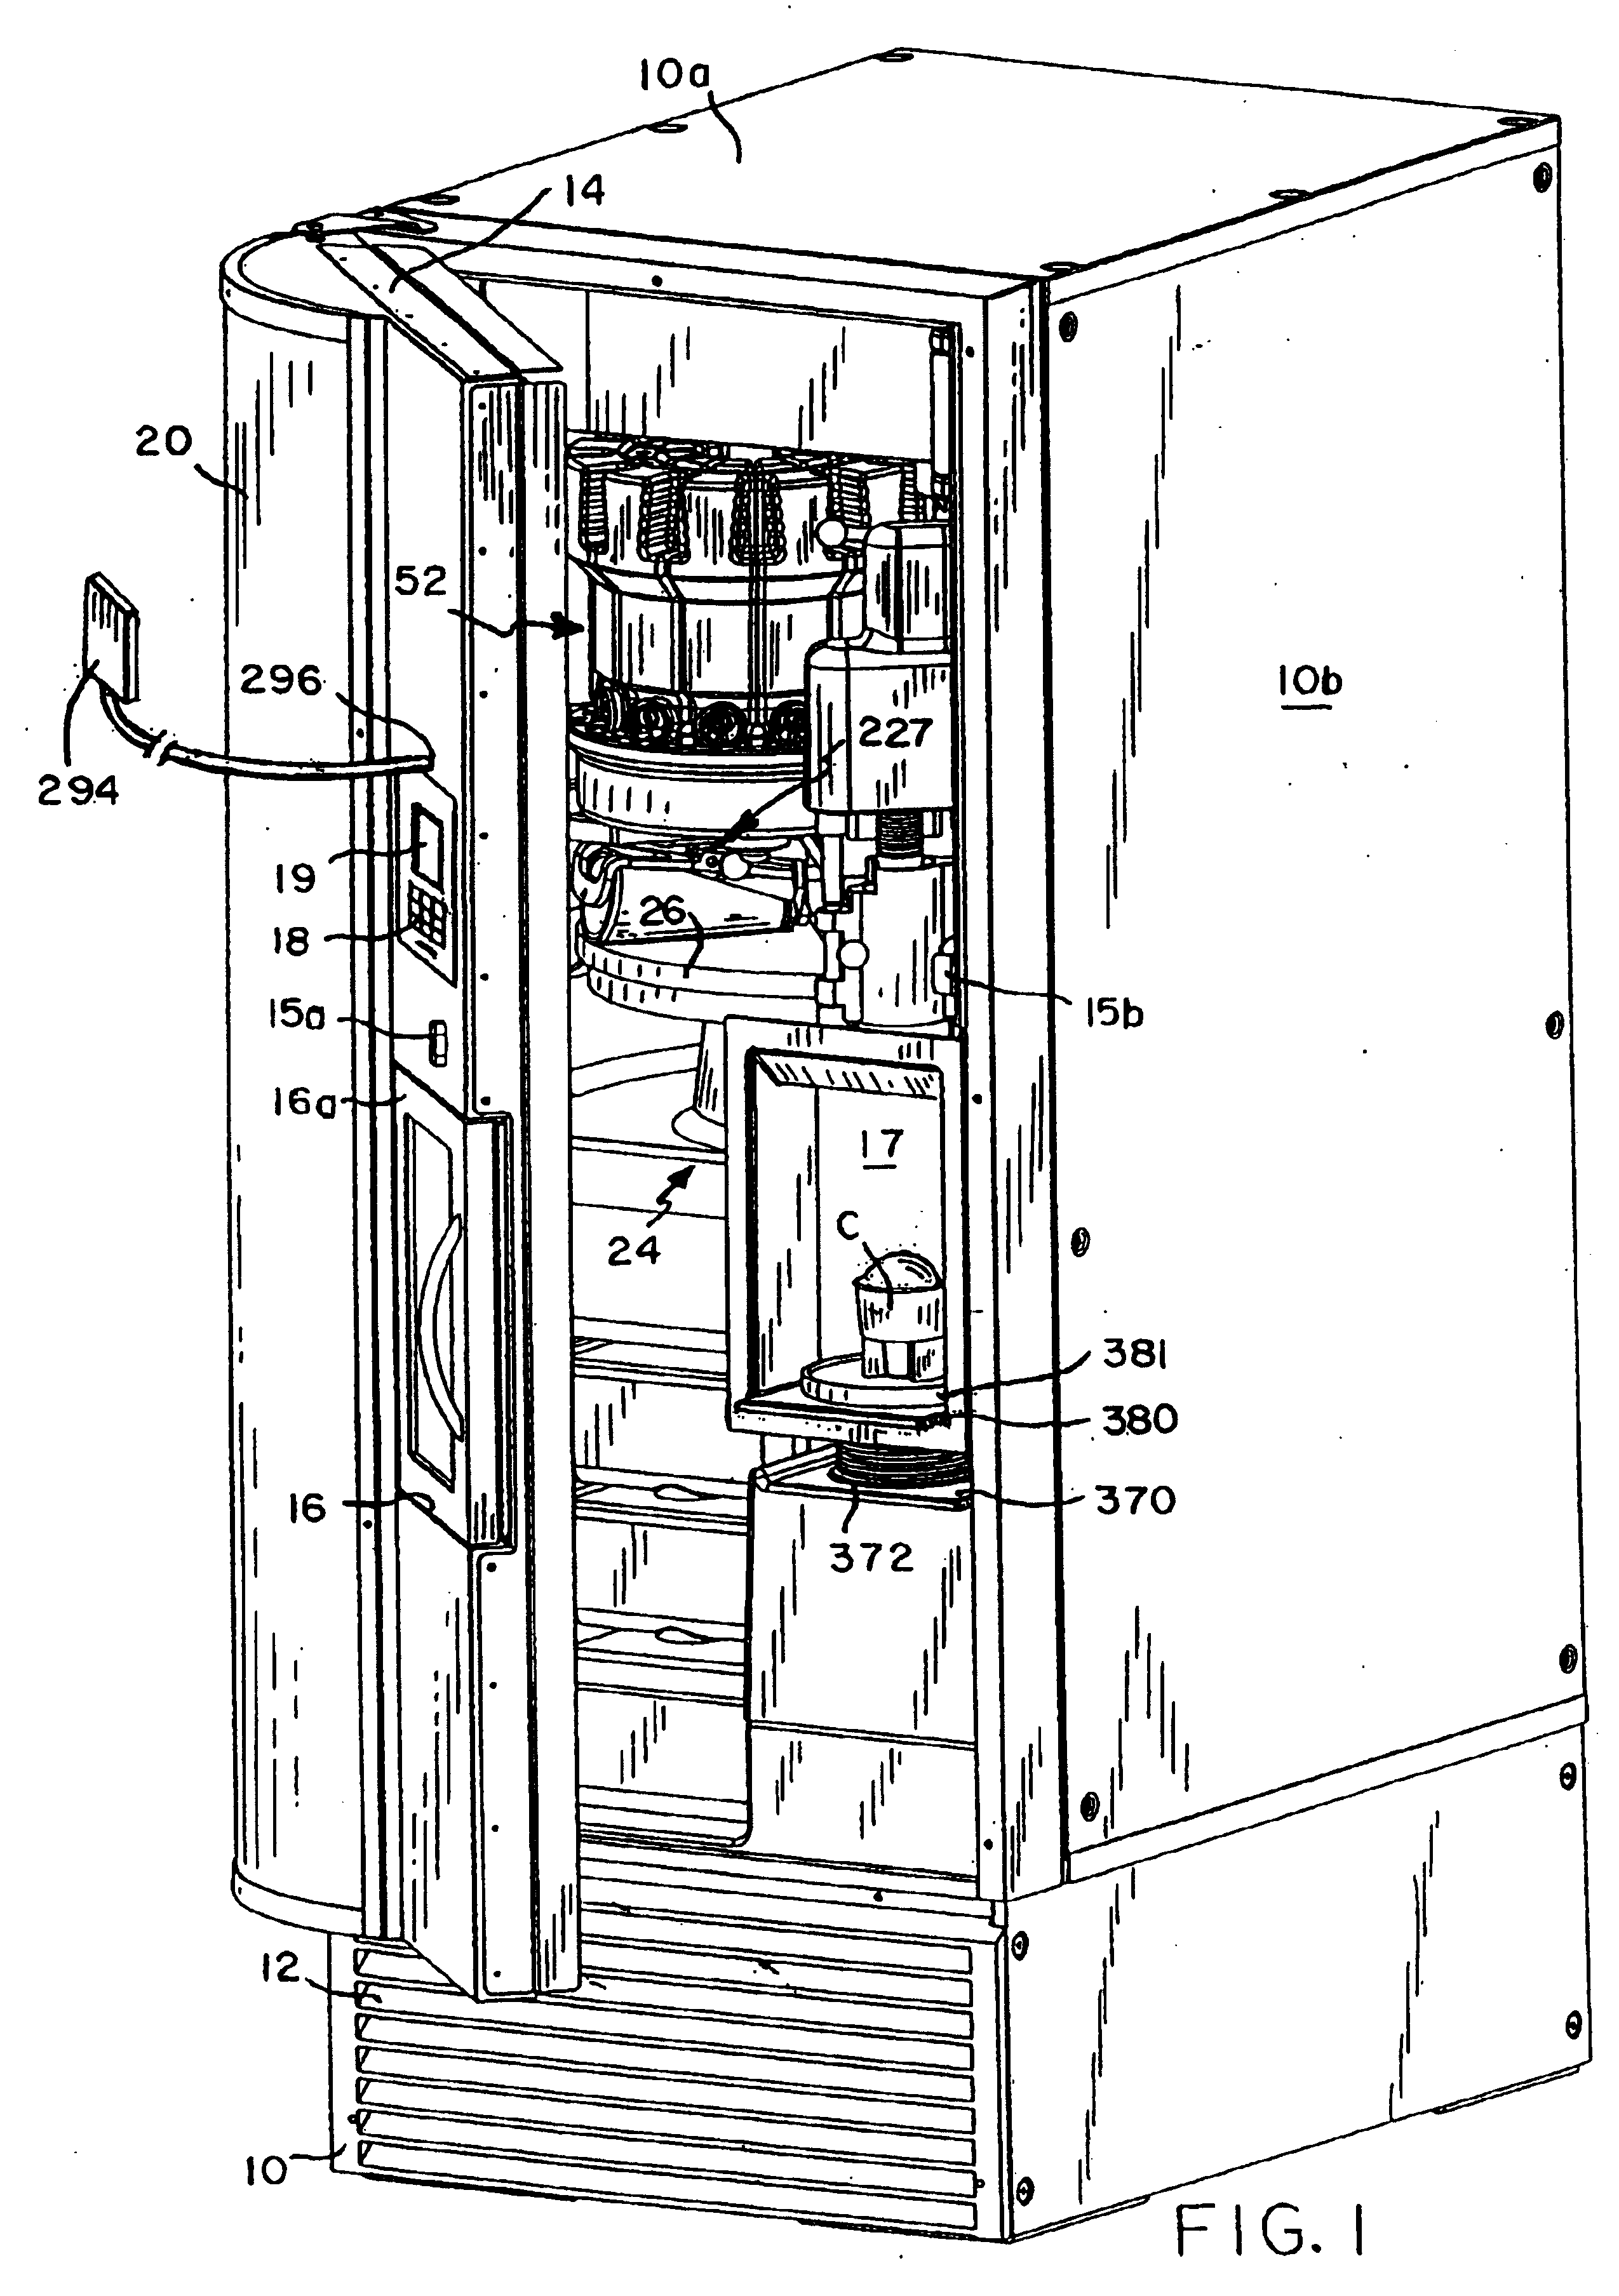 Method and apparatus for producing and dispensing an earated and/or blended food product